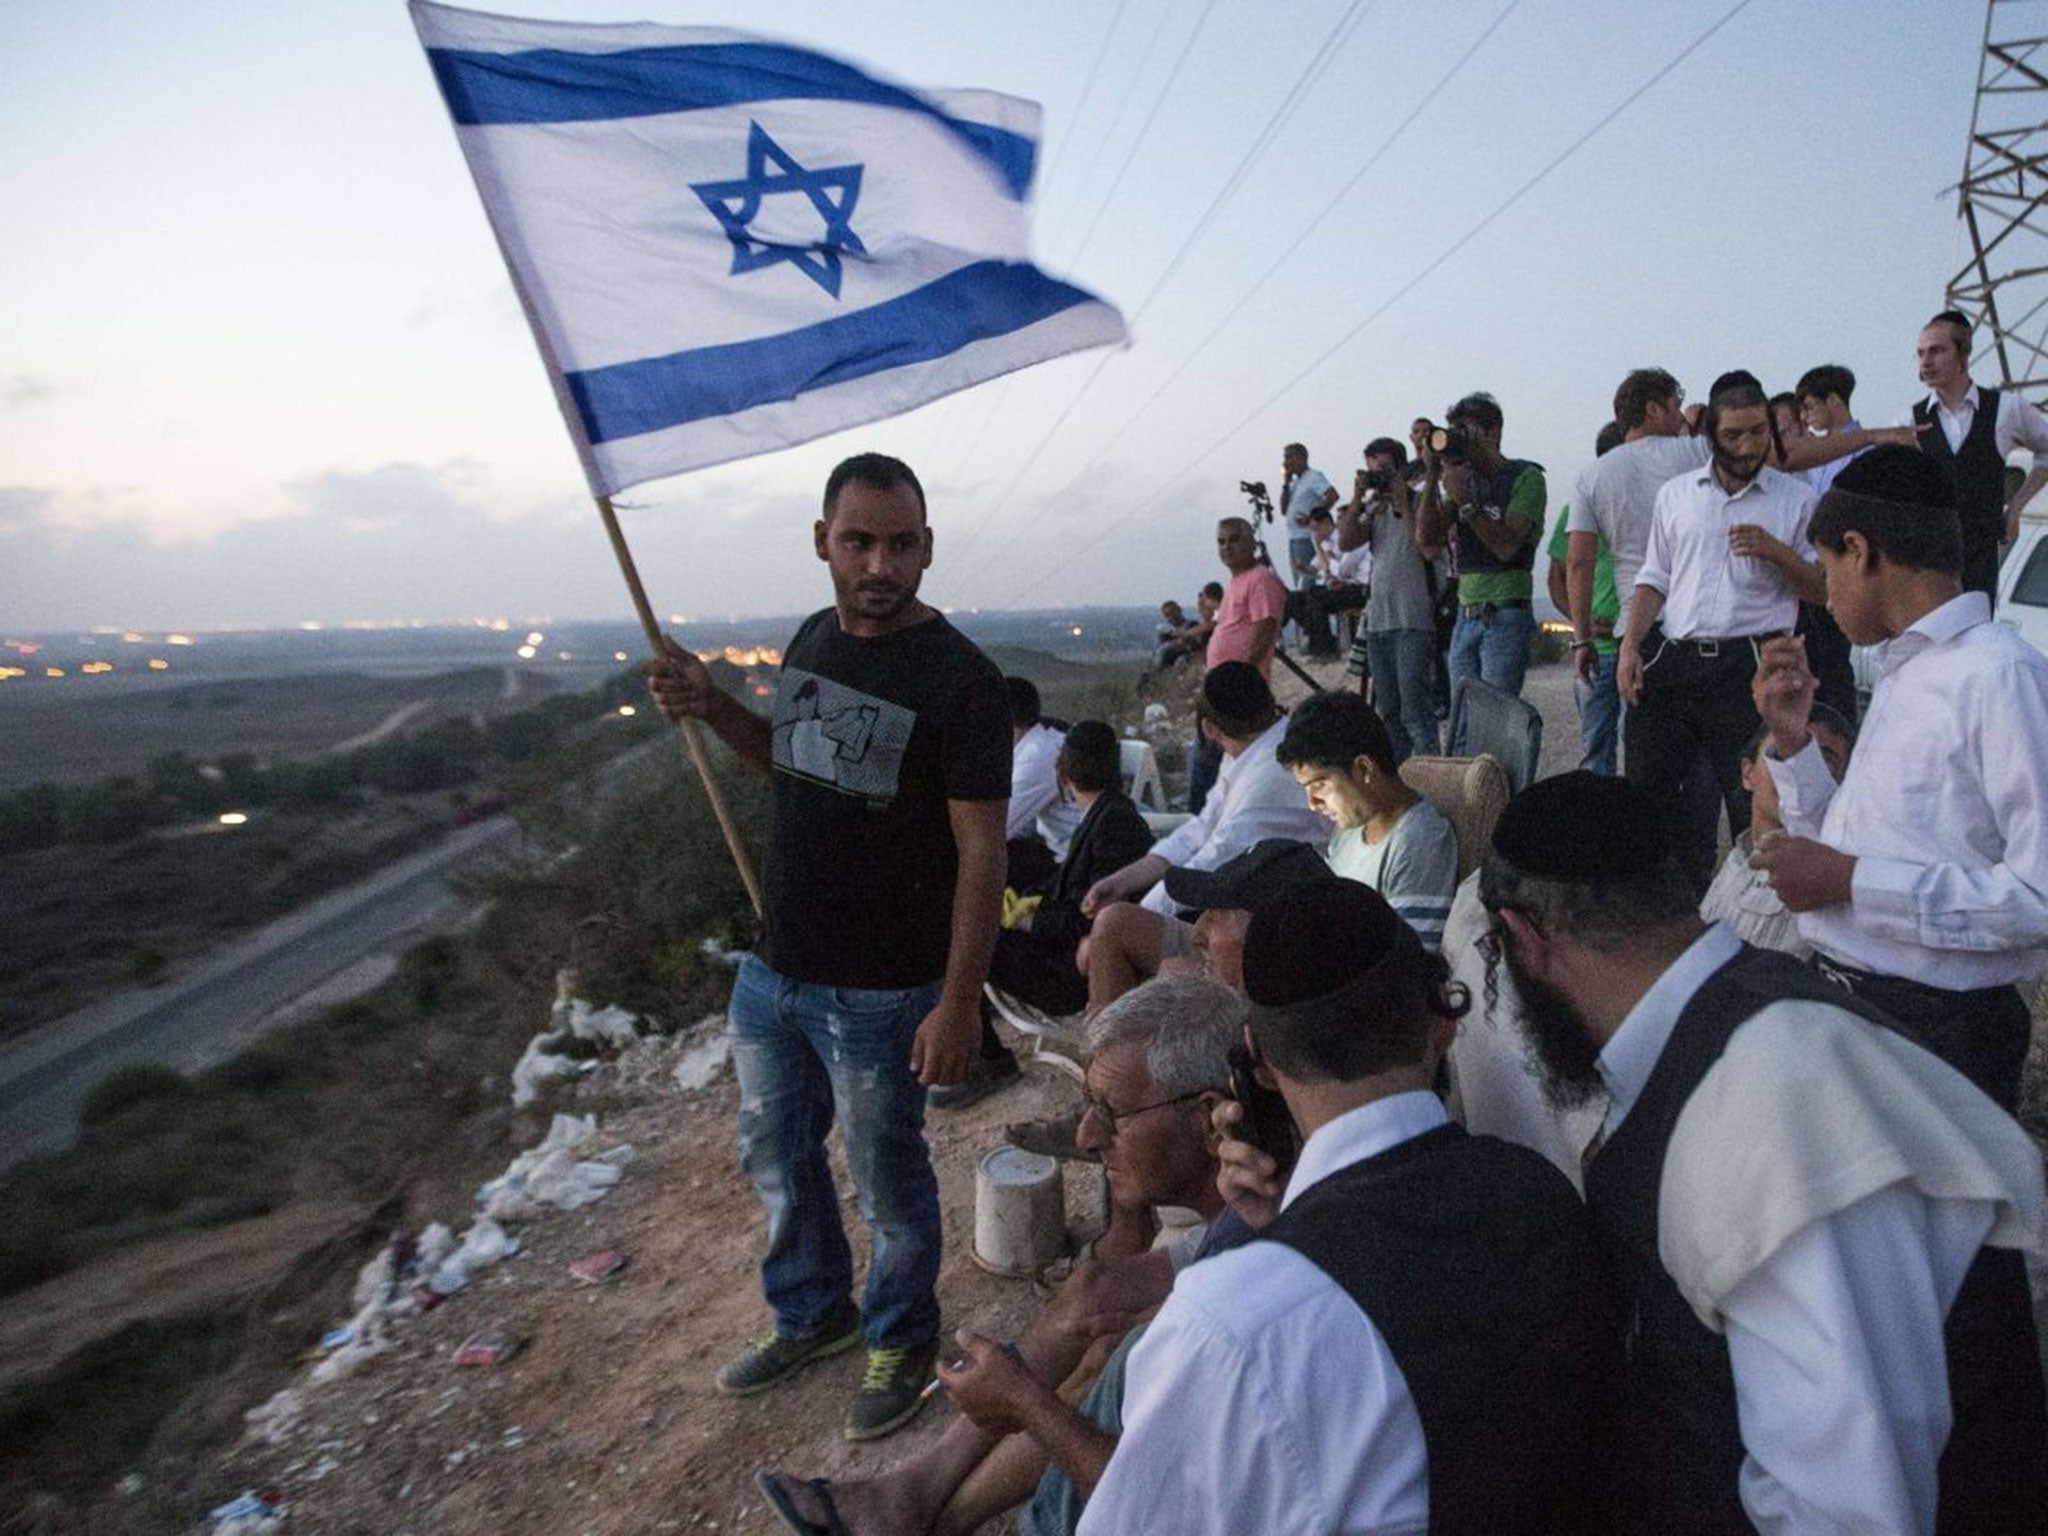 Top down: Israelis, on a hill overlooking Gaza, watch the fighting